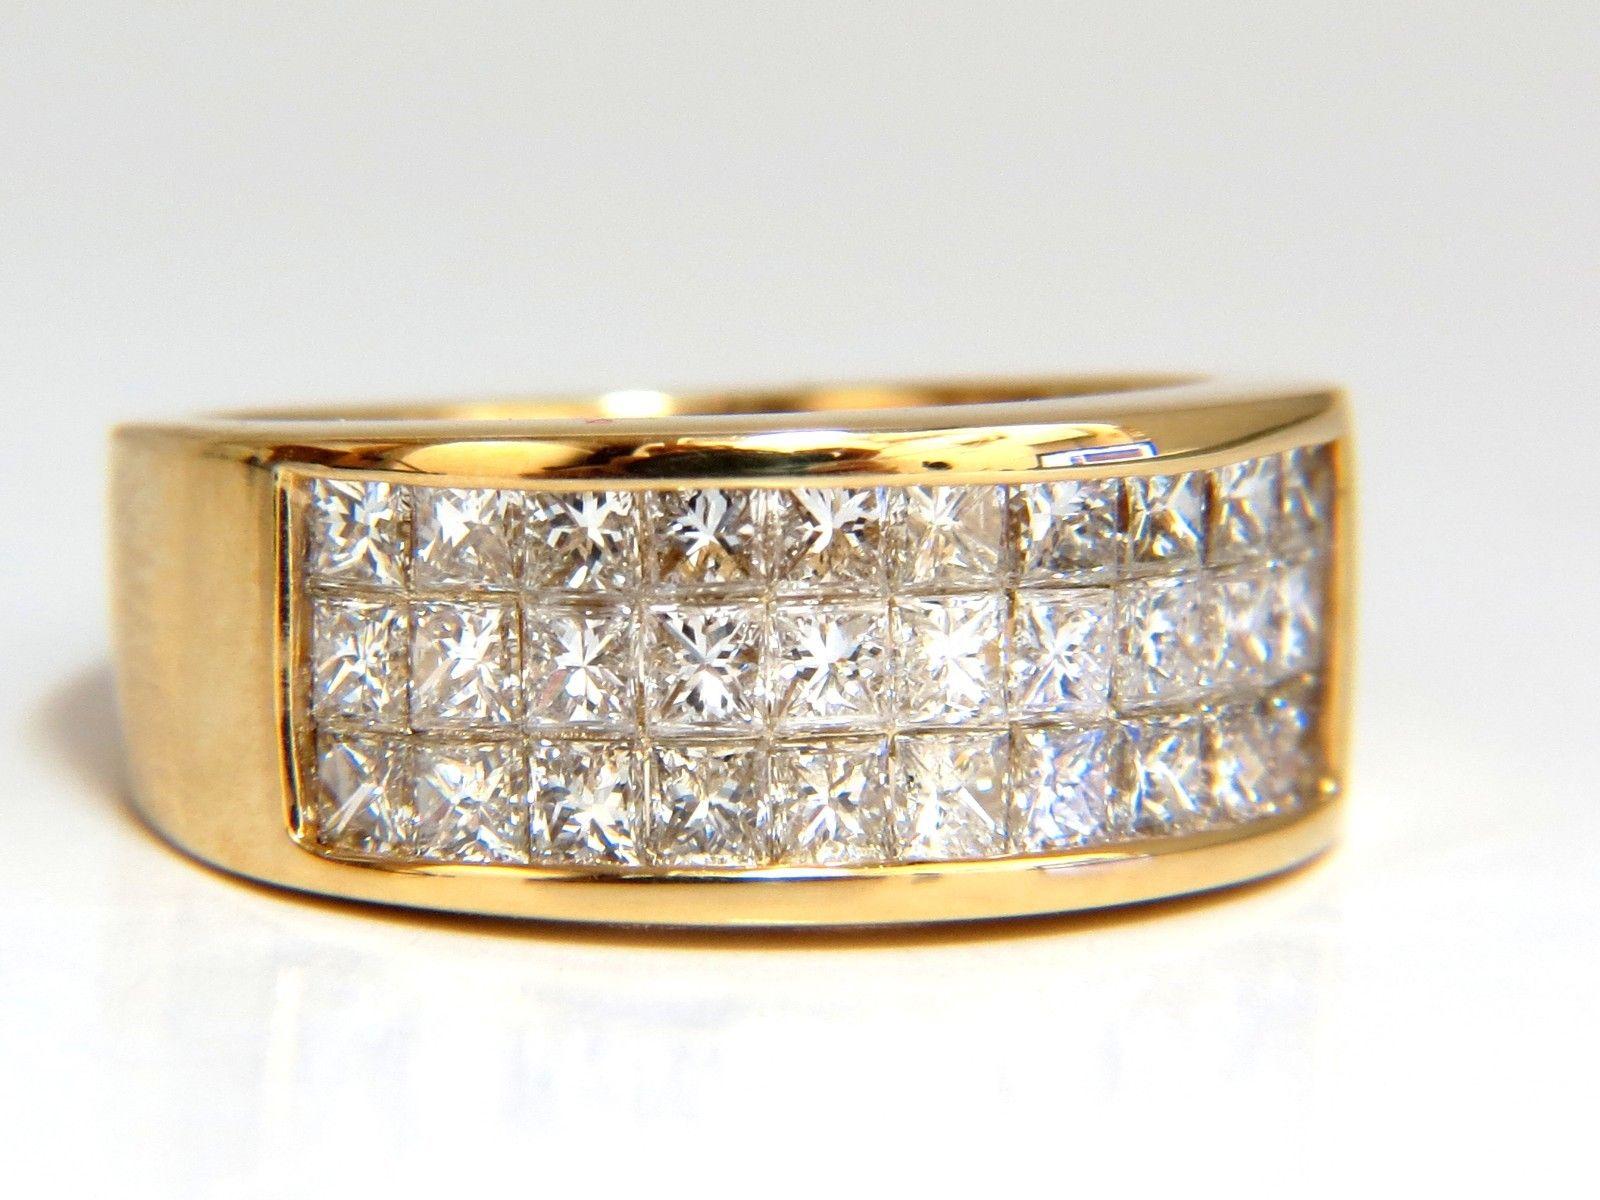 Princess Durable
1.85ct. Natural Princess cut brilliant diamond

Channel Row ring.

Vs-2 clarity  H color.

14kt yellow gold.

6.8 Grams

Overall ring: 8mm diameter

Depth: 3mm

Current ring size: 6.25

May professionally resize, please